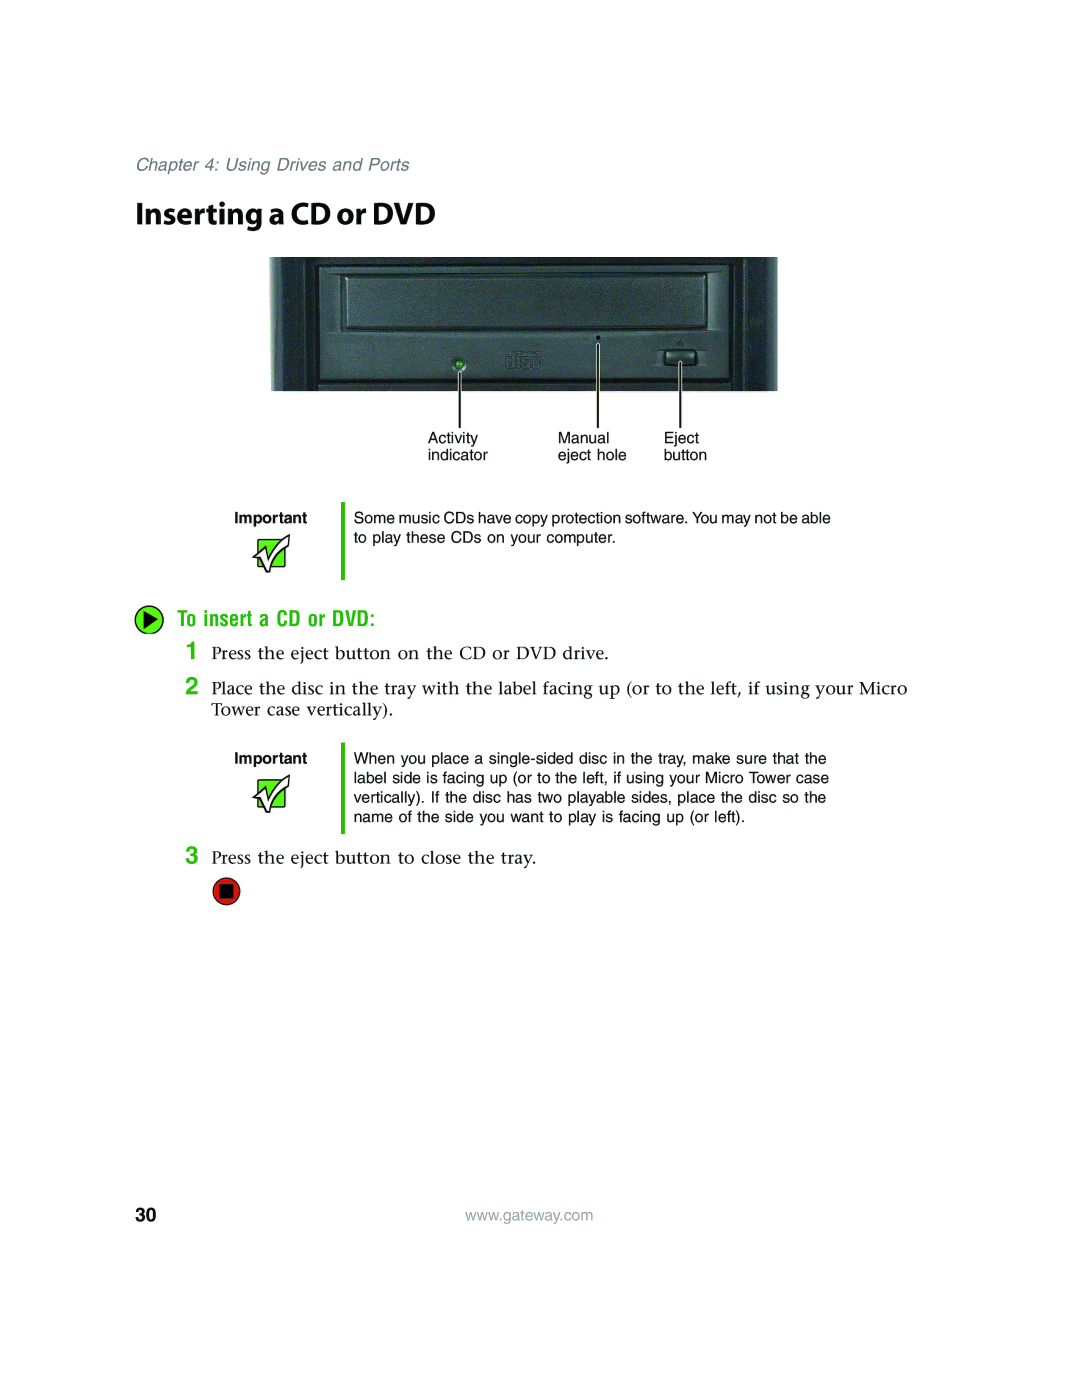 Gateway E4350 manual Inserting a CD or DVD, To insert a CD or DVD 